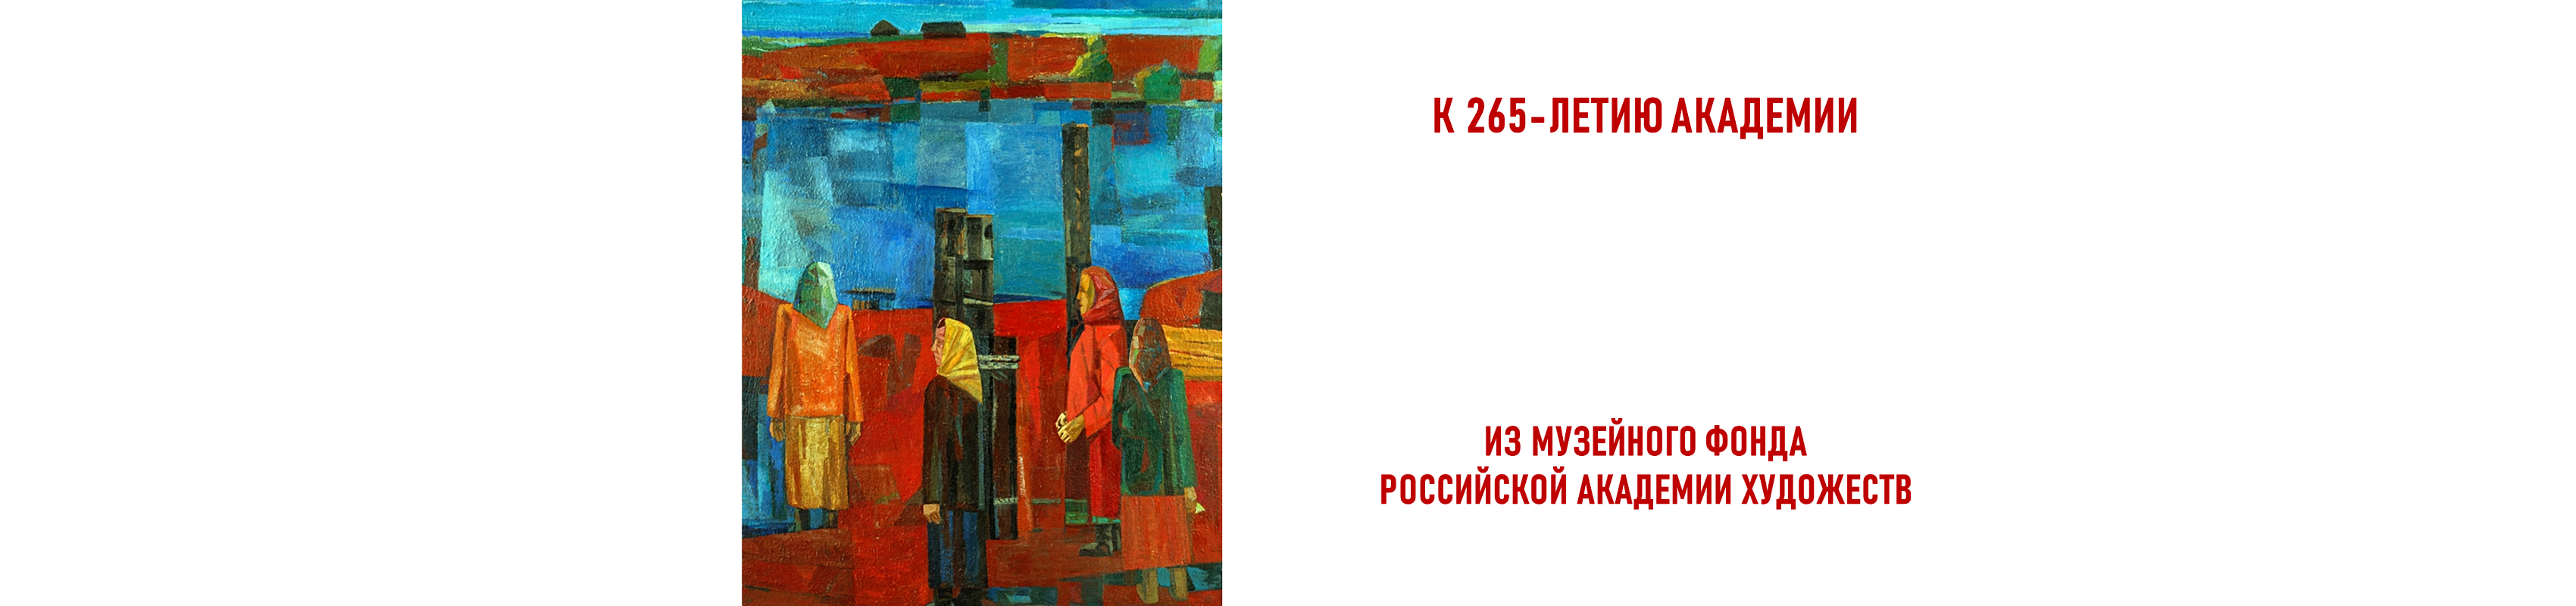 FROM THE MUSEUM FUND OF THE RUSSIAN ACADEMY OF ARTS: THE JUBILEE EXHIBITION PROJECT AT THE MUSEUM AND EXHIBITION COMPLEX OF THE RUSSIAN ACADEMY OF ARTS